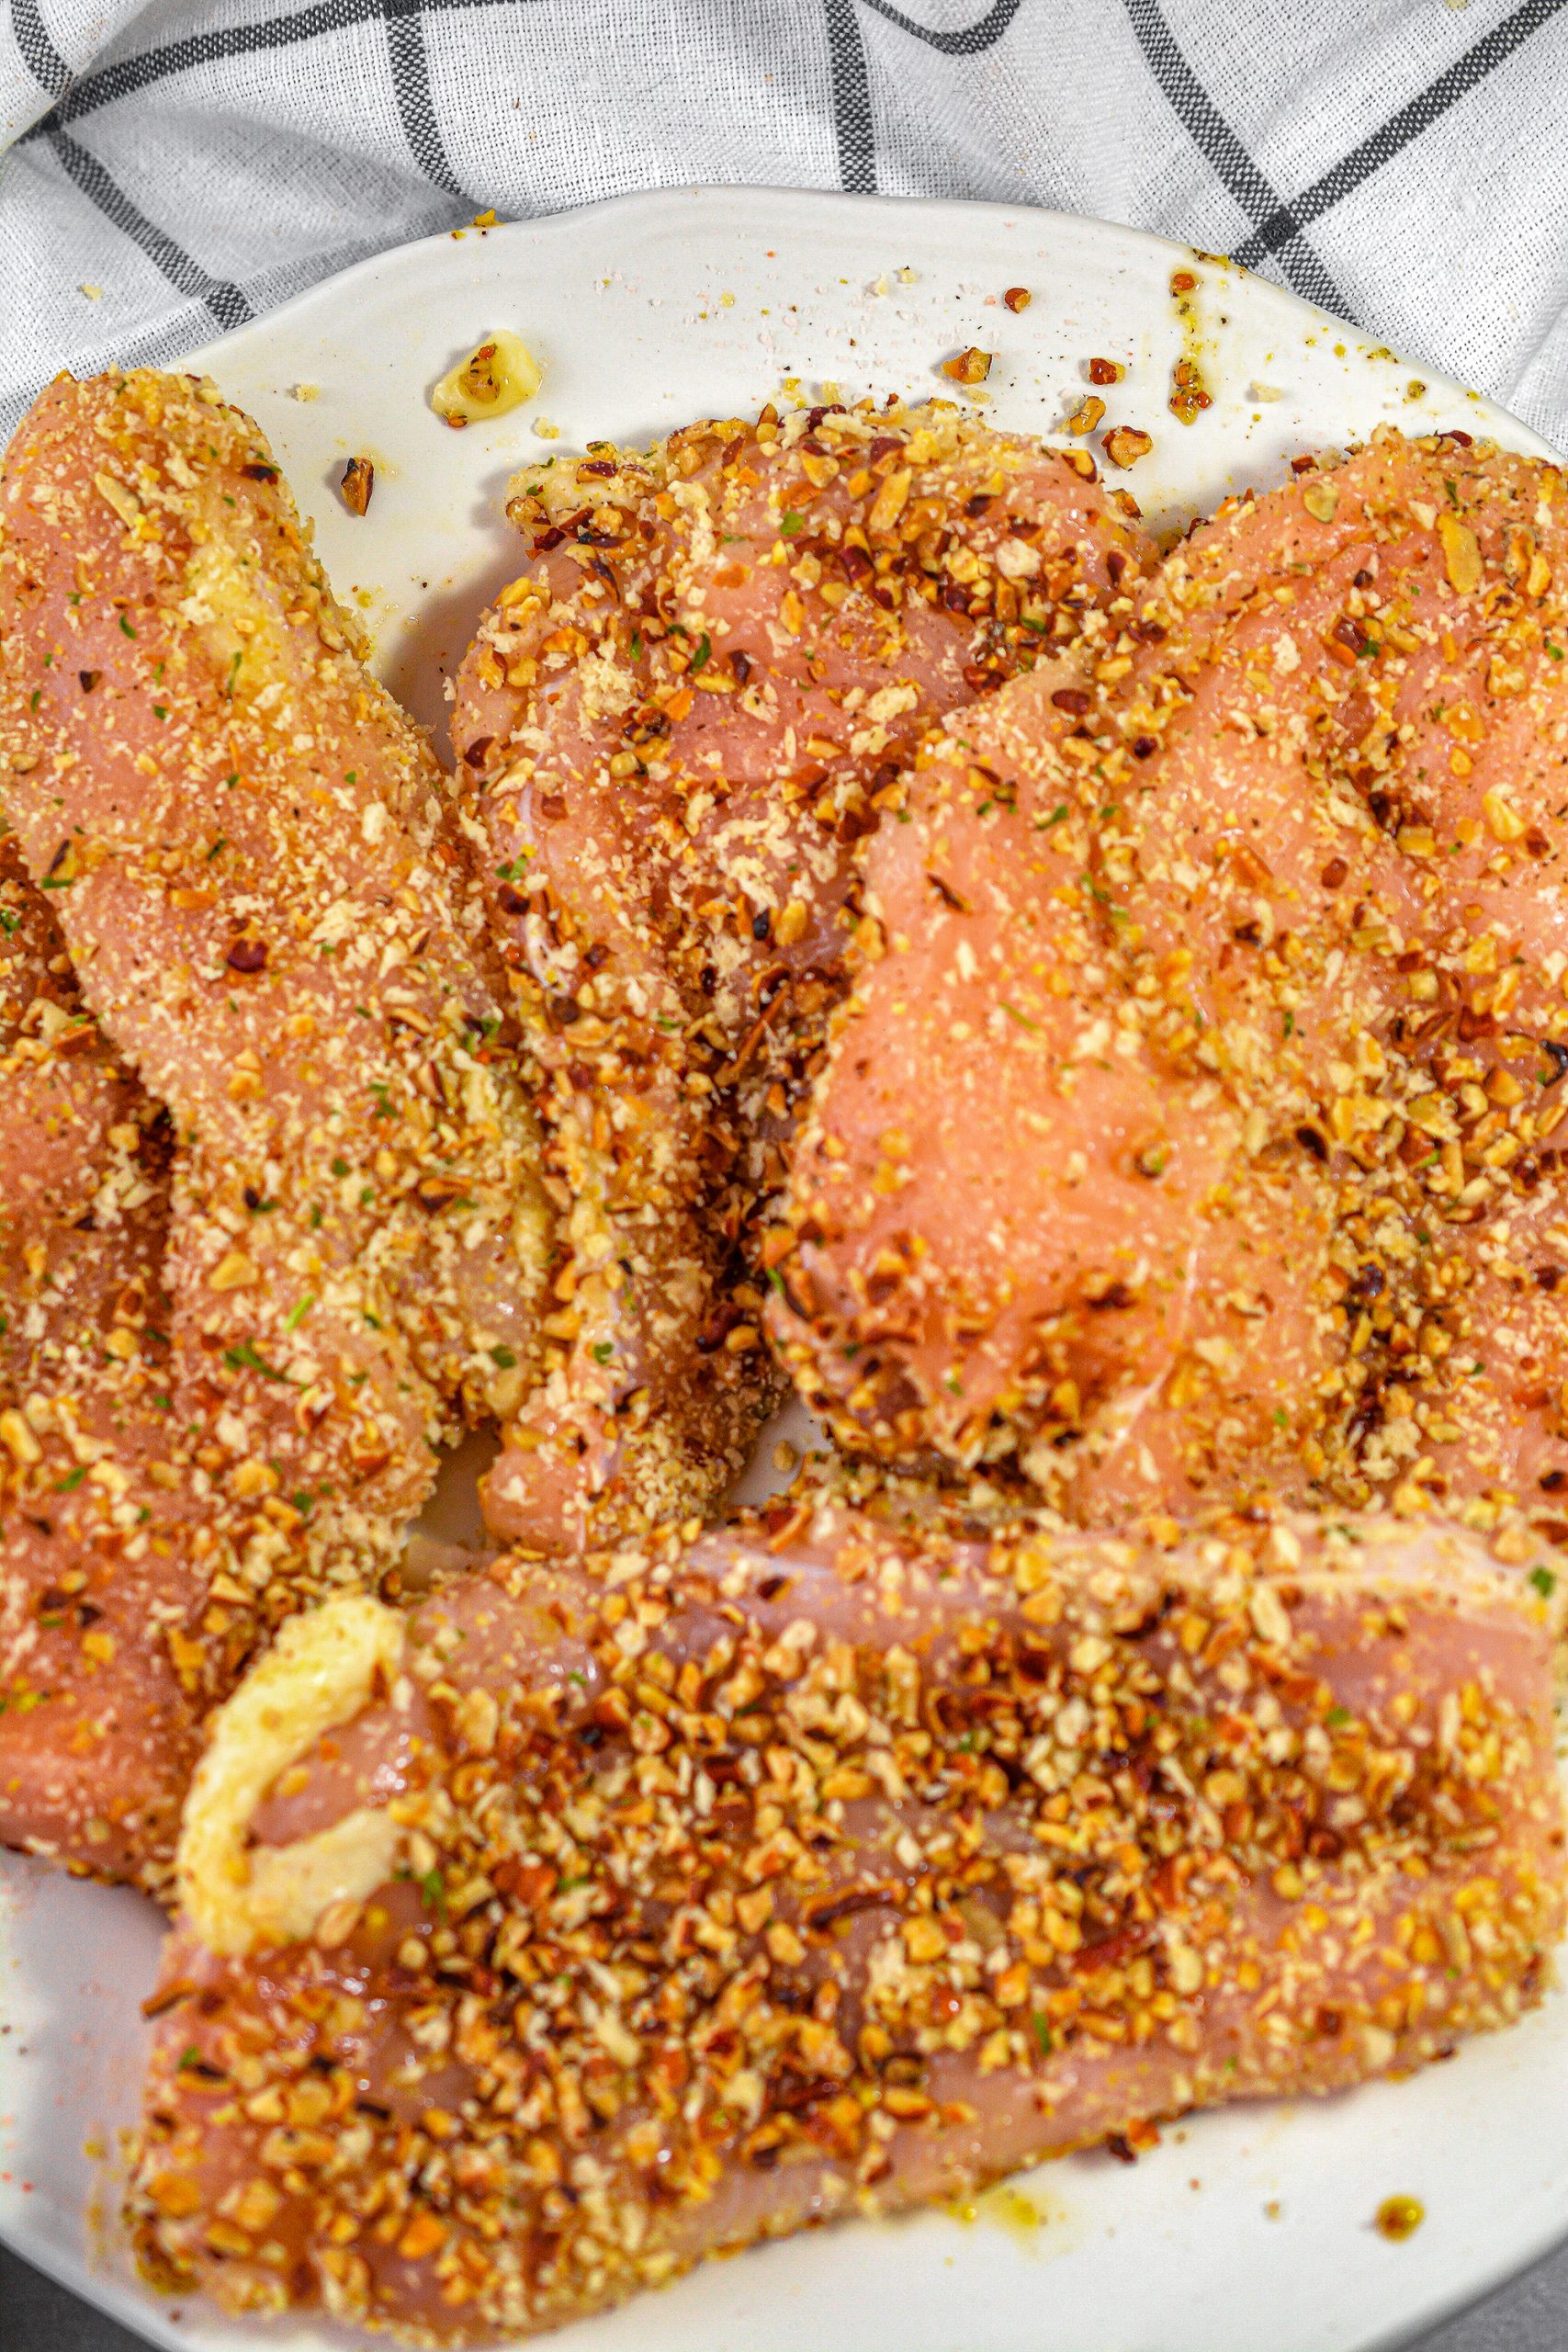 Place the chicken breasts into the Ziploc bag and coat well in the pecan mixture.